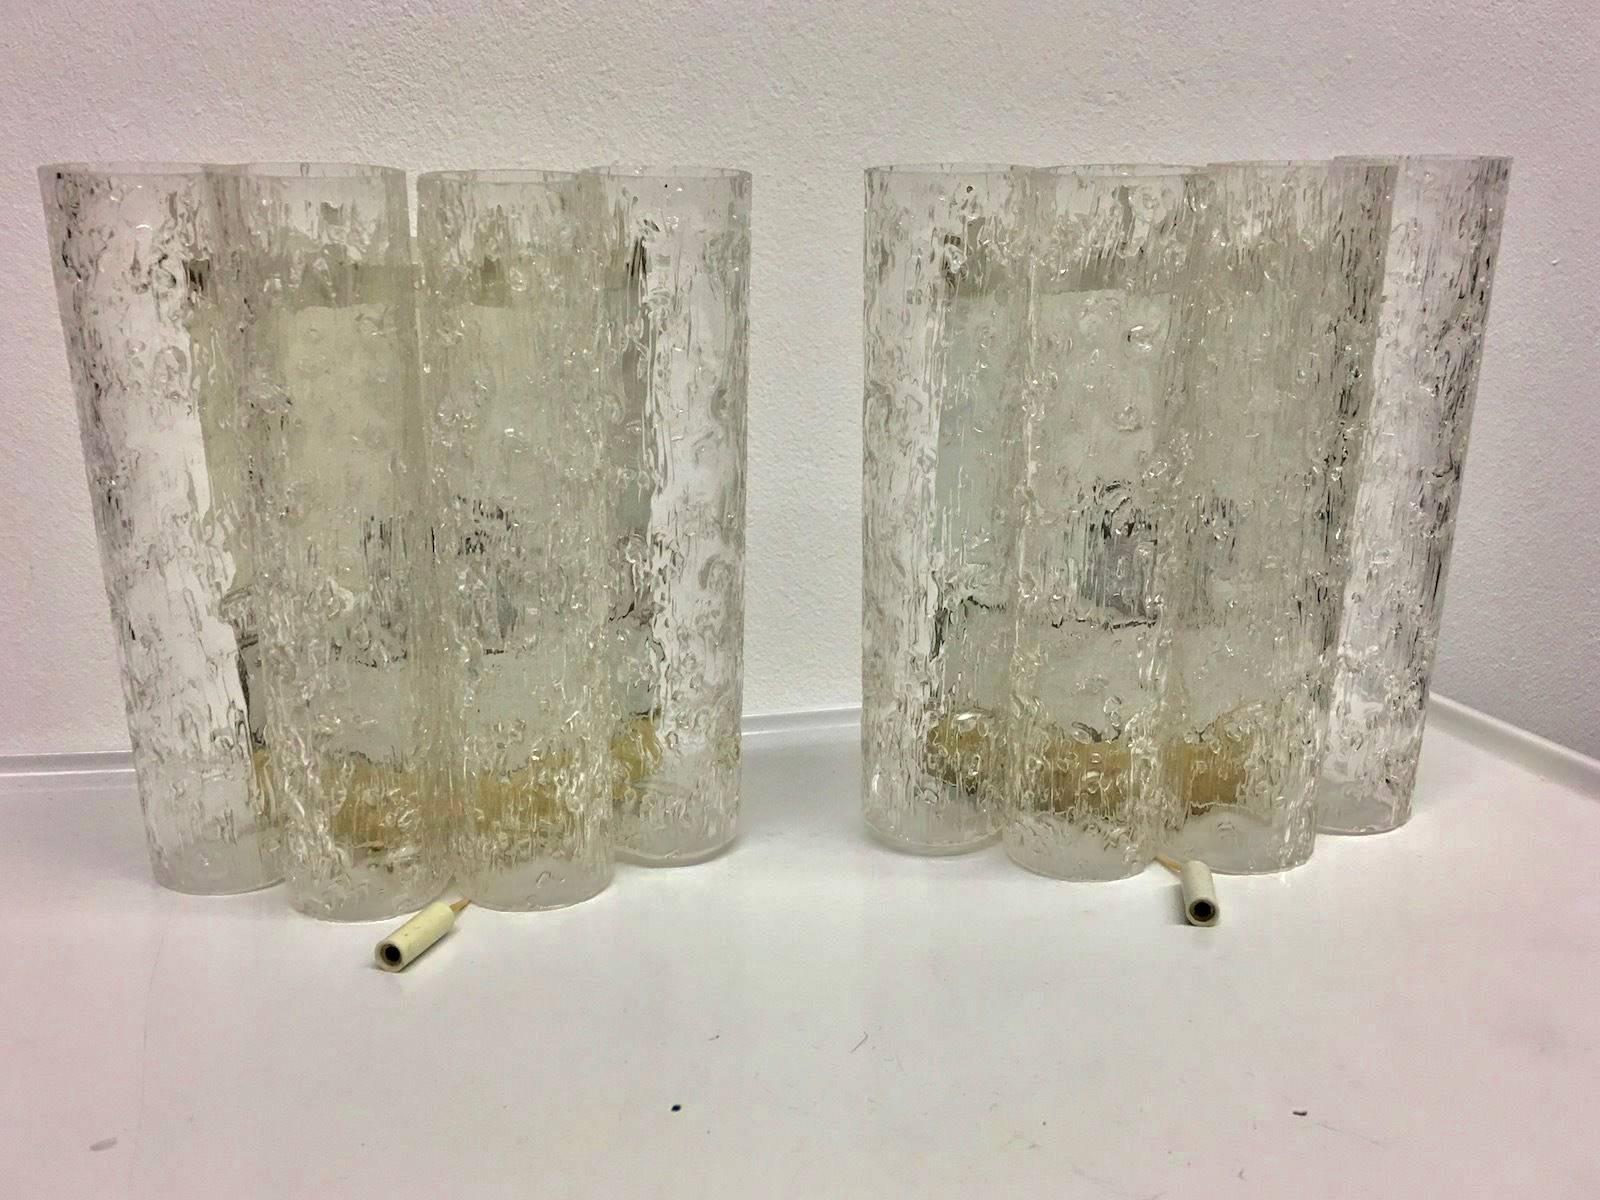 Pair of sconces mid century by Doria Leuchten of  Germany. Each fixture requires one European E14 candelabra bulb, each bulb up to 40 watts.
Lovely lighting effect.